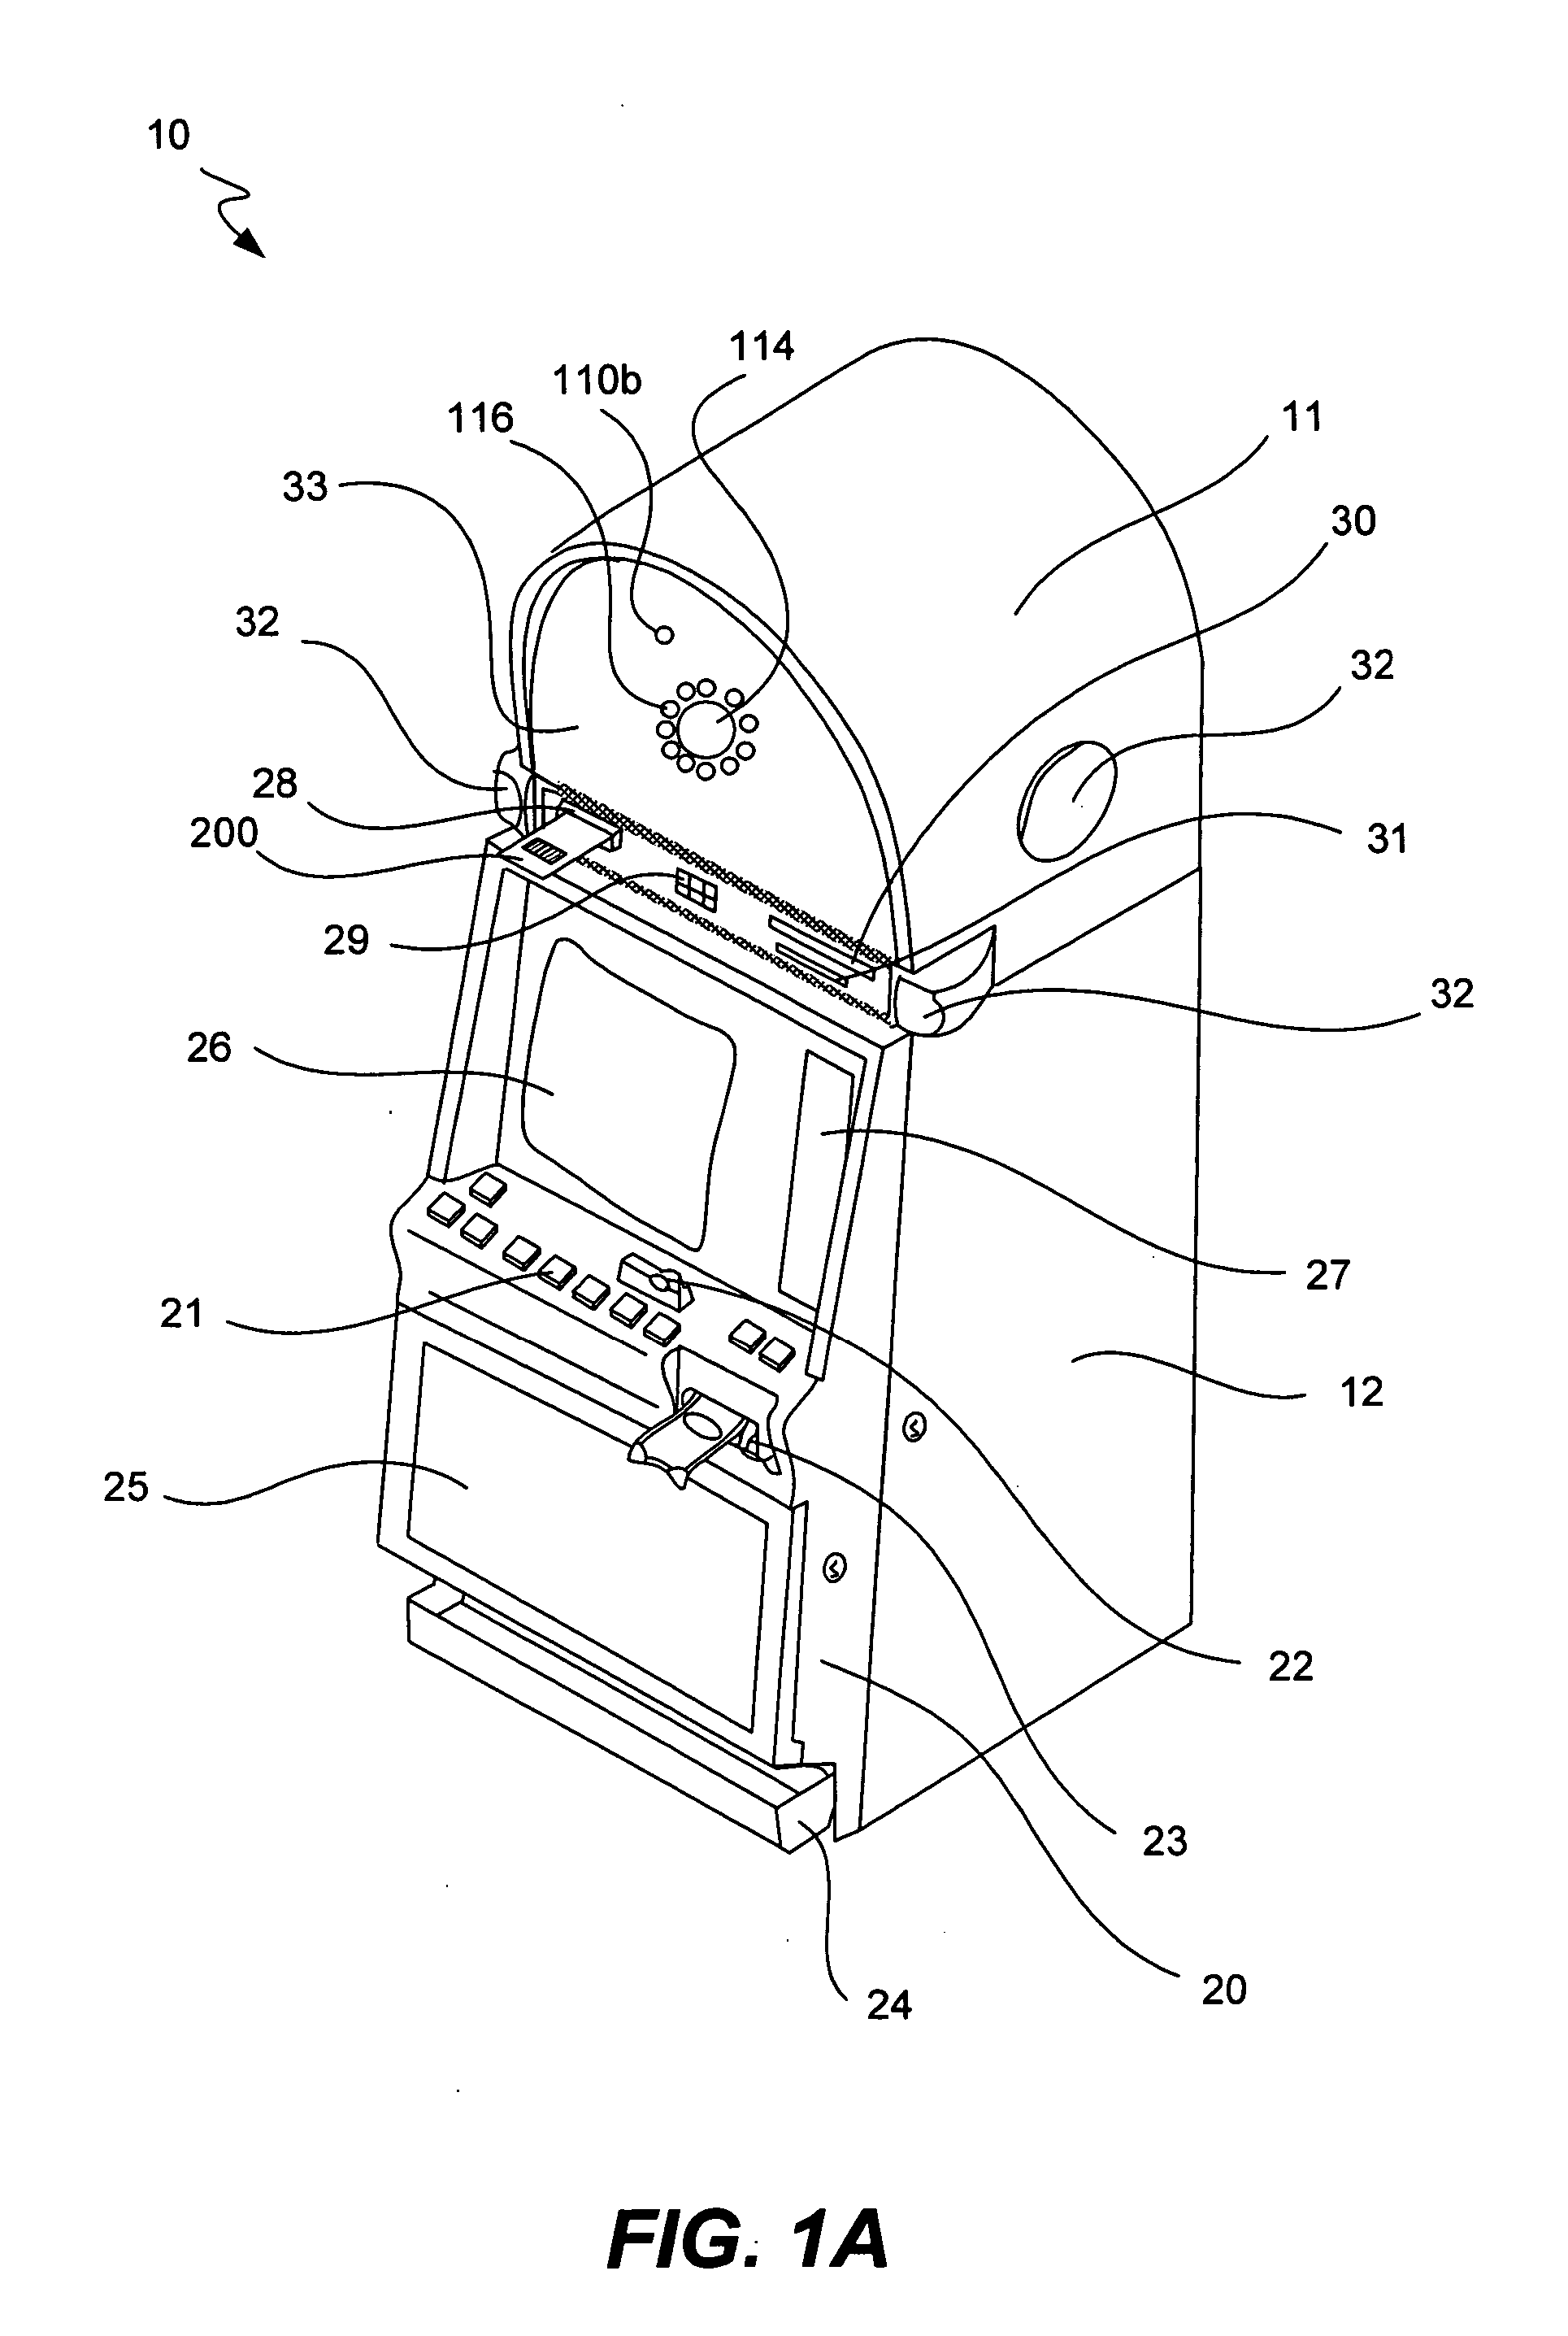 Gaming machine with scanning 3-D display system